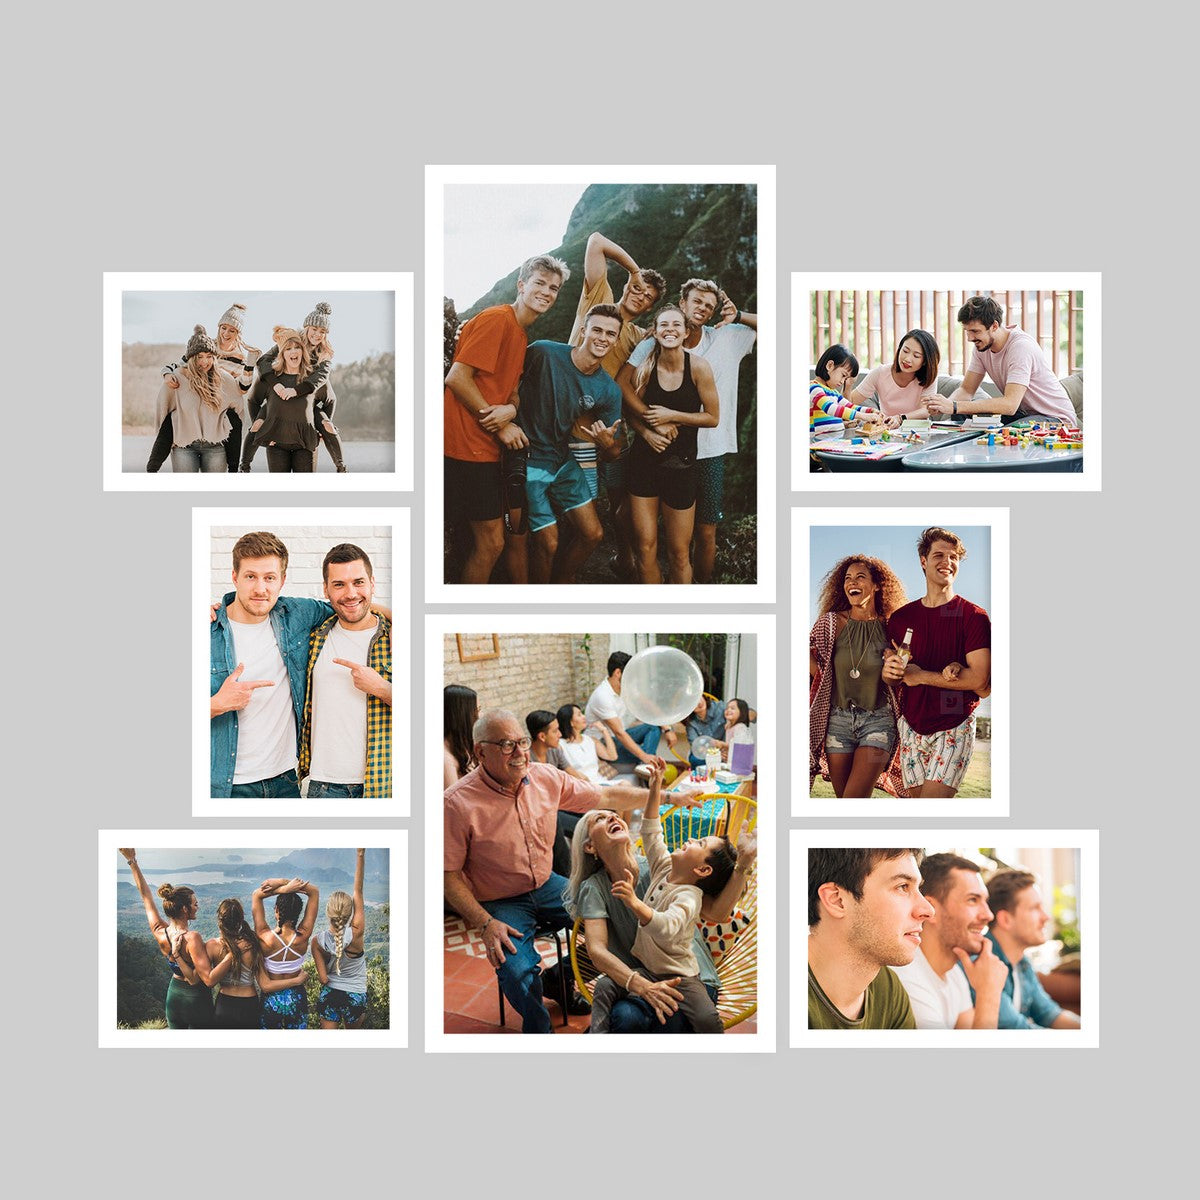 Memory Wall Collage Photo Frame - Set of 8 Photo Frames for 6 Photos of 5"x7", 2 Photos of 8"x10"